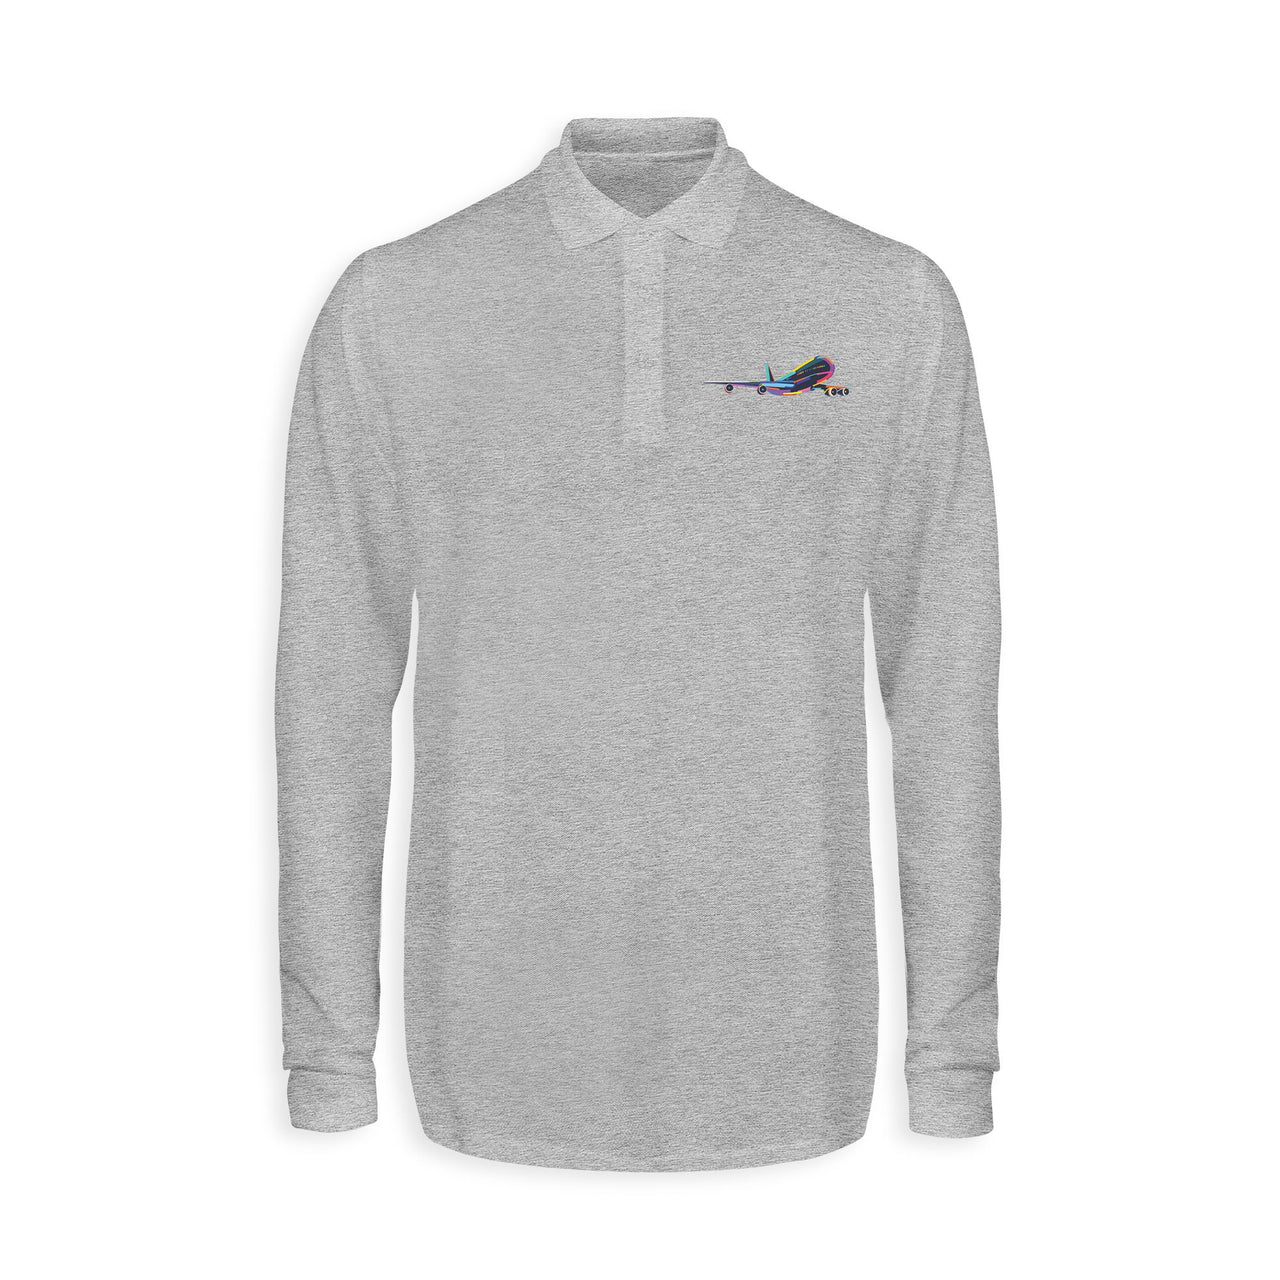 Multicolor Airplane Designed Long Sleeve Polo T-Shirts